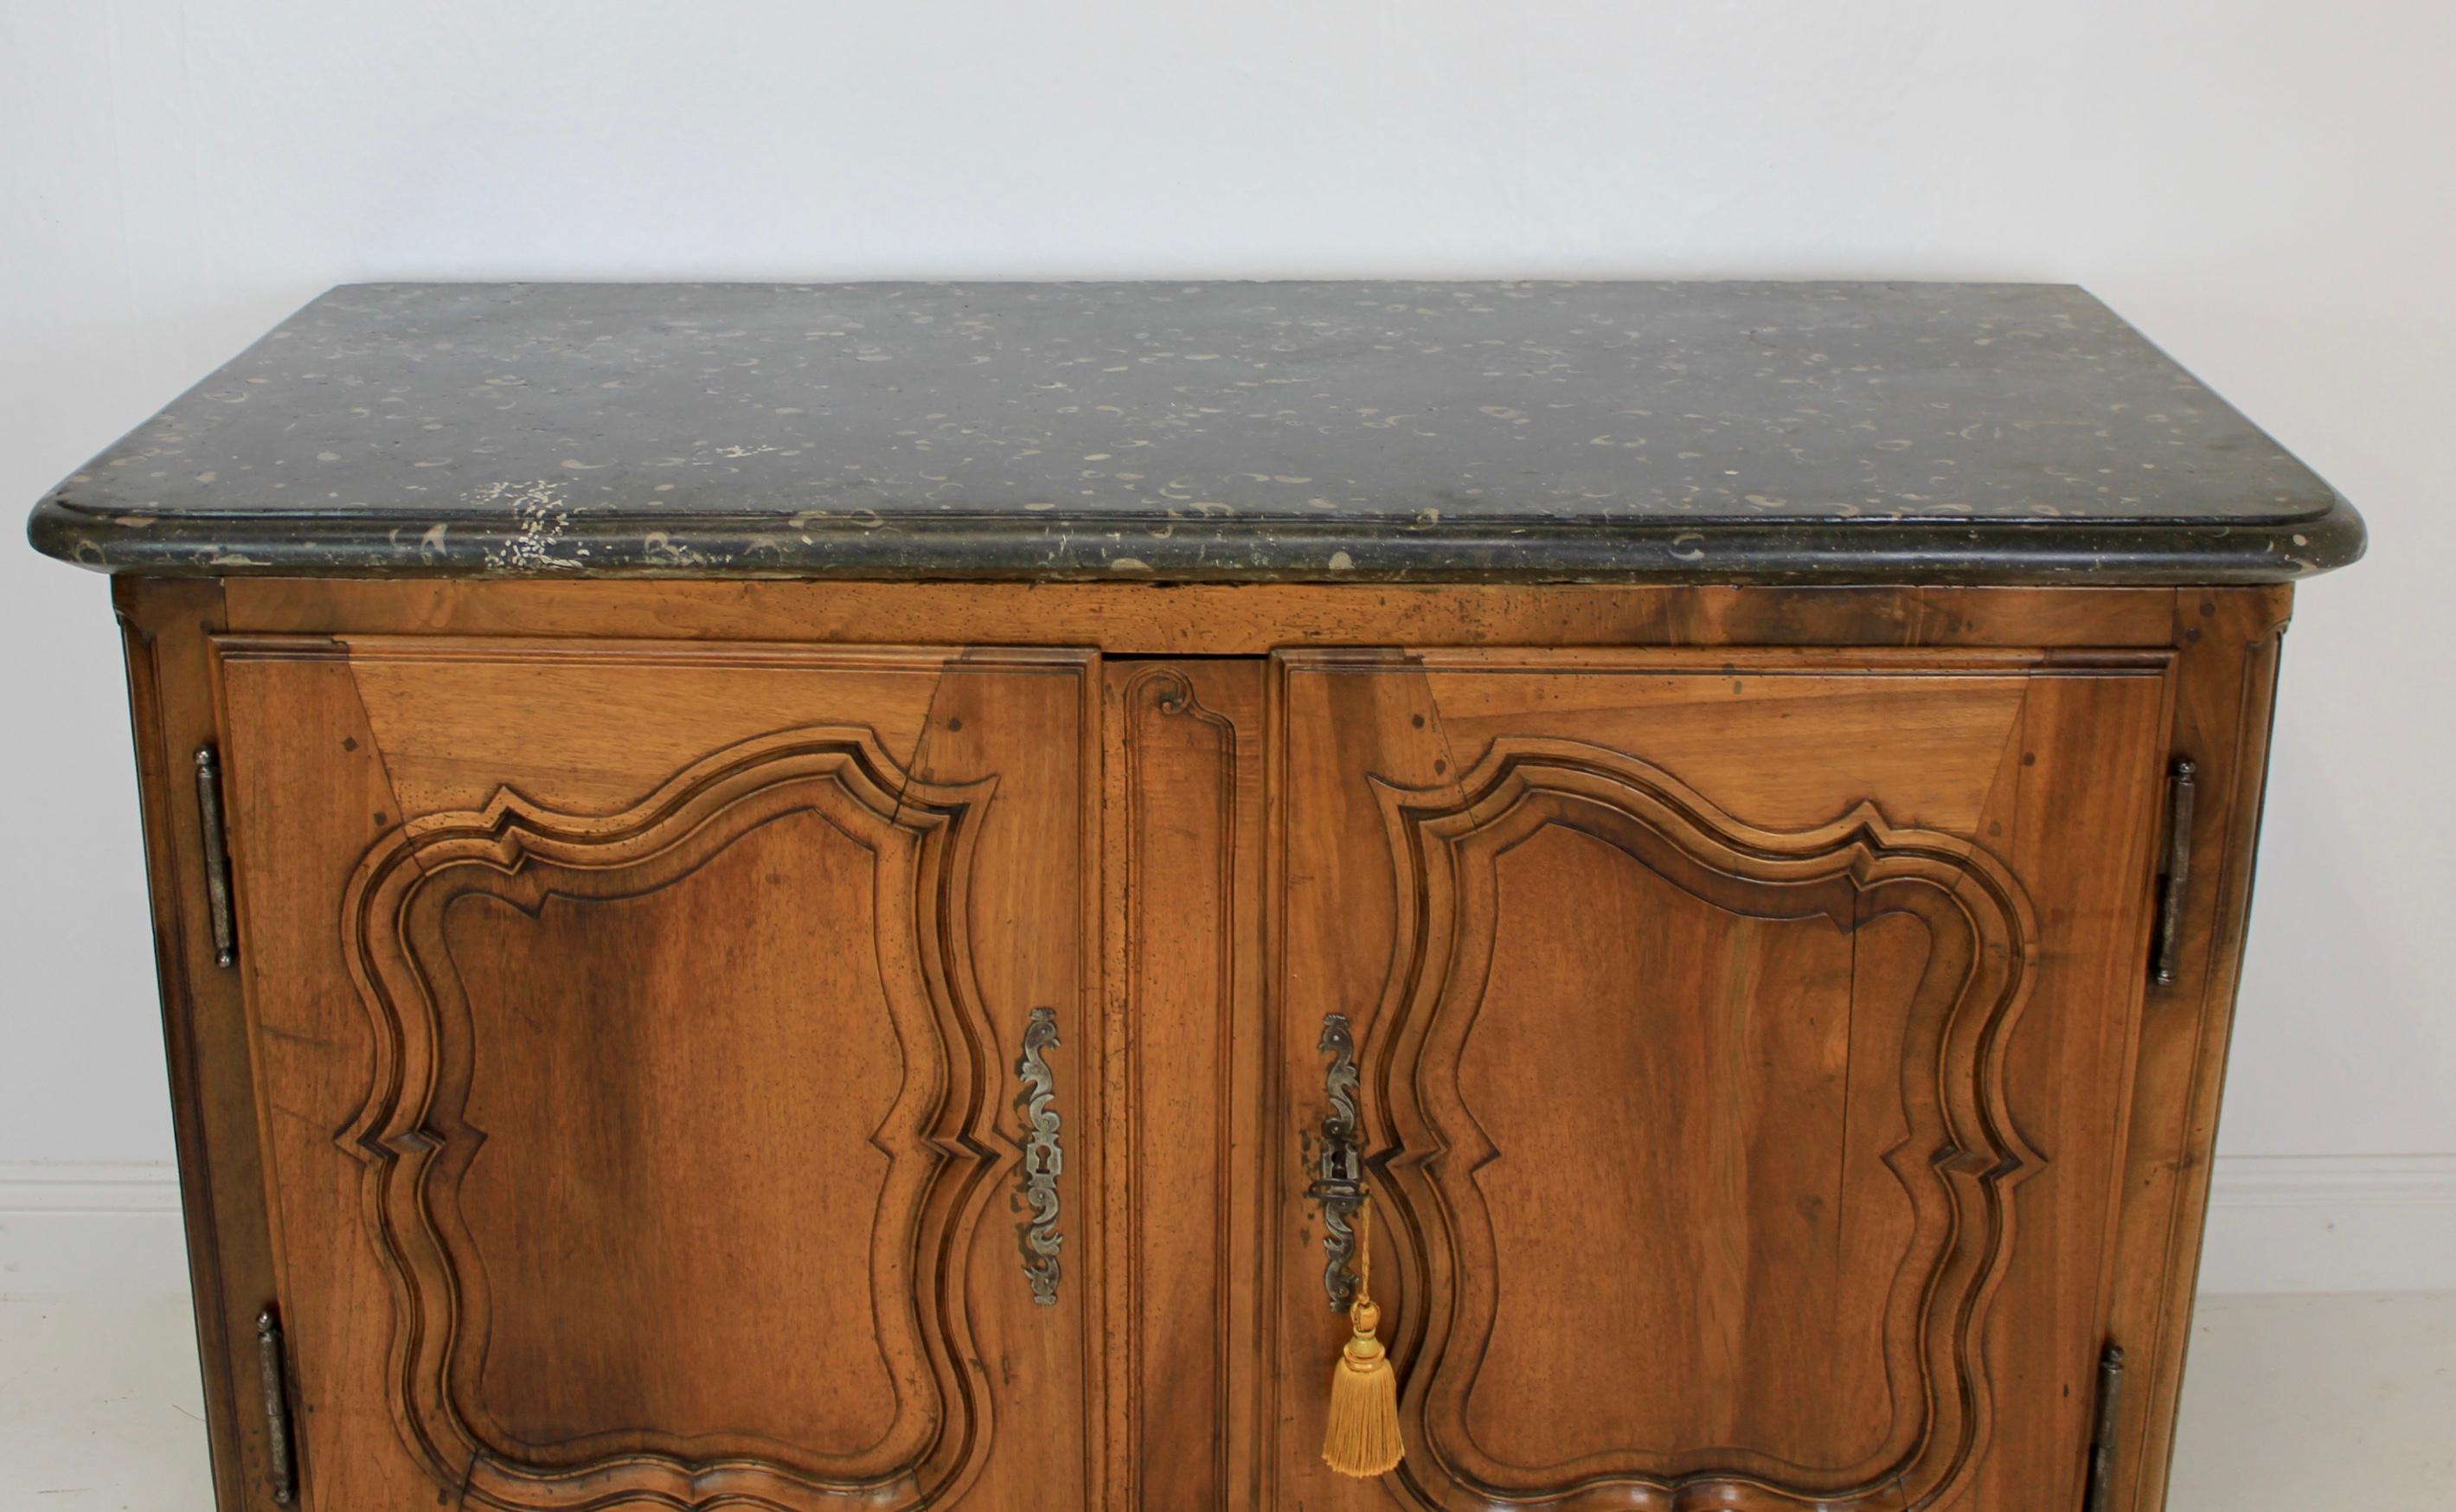 An exceptional French buffet with a thick grey oyster marble top. This buffet is in outstanding condition with its original key and locking mechanism working perfectly. It docent get much better than this.